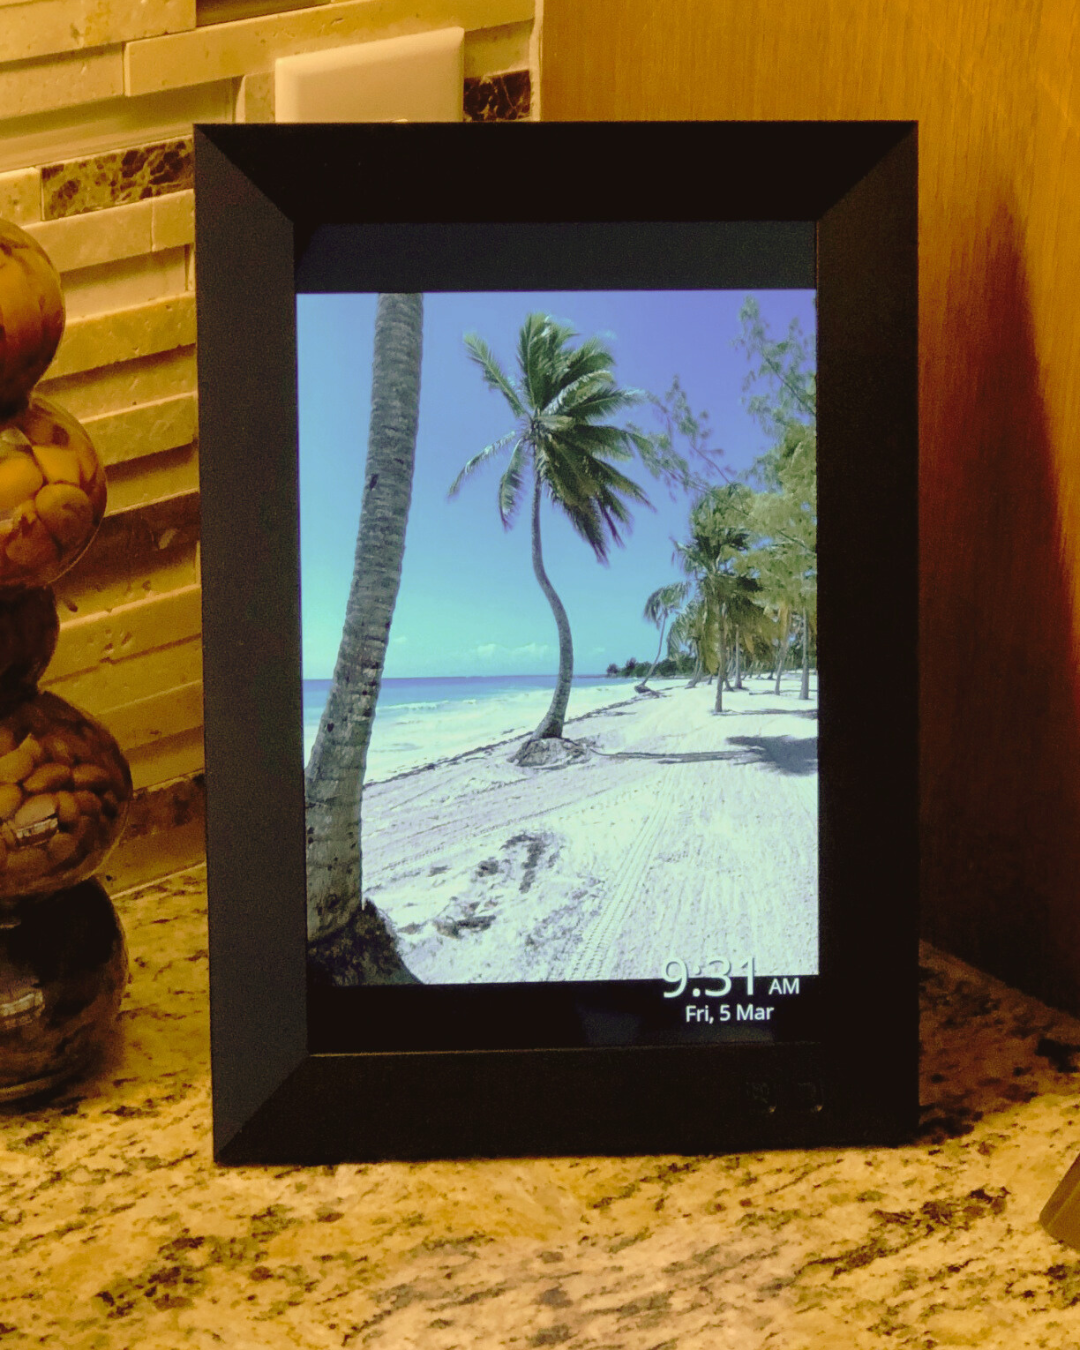 Best Smart Digital Photo Frames - The Ultimate Guide To Make Your Home Smarter